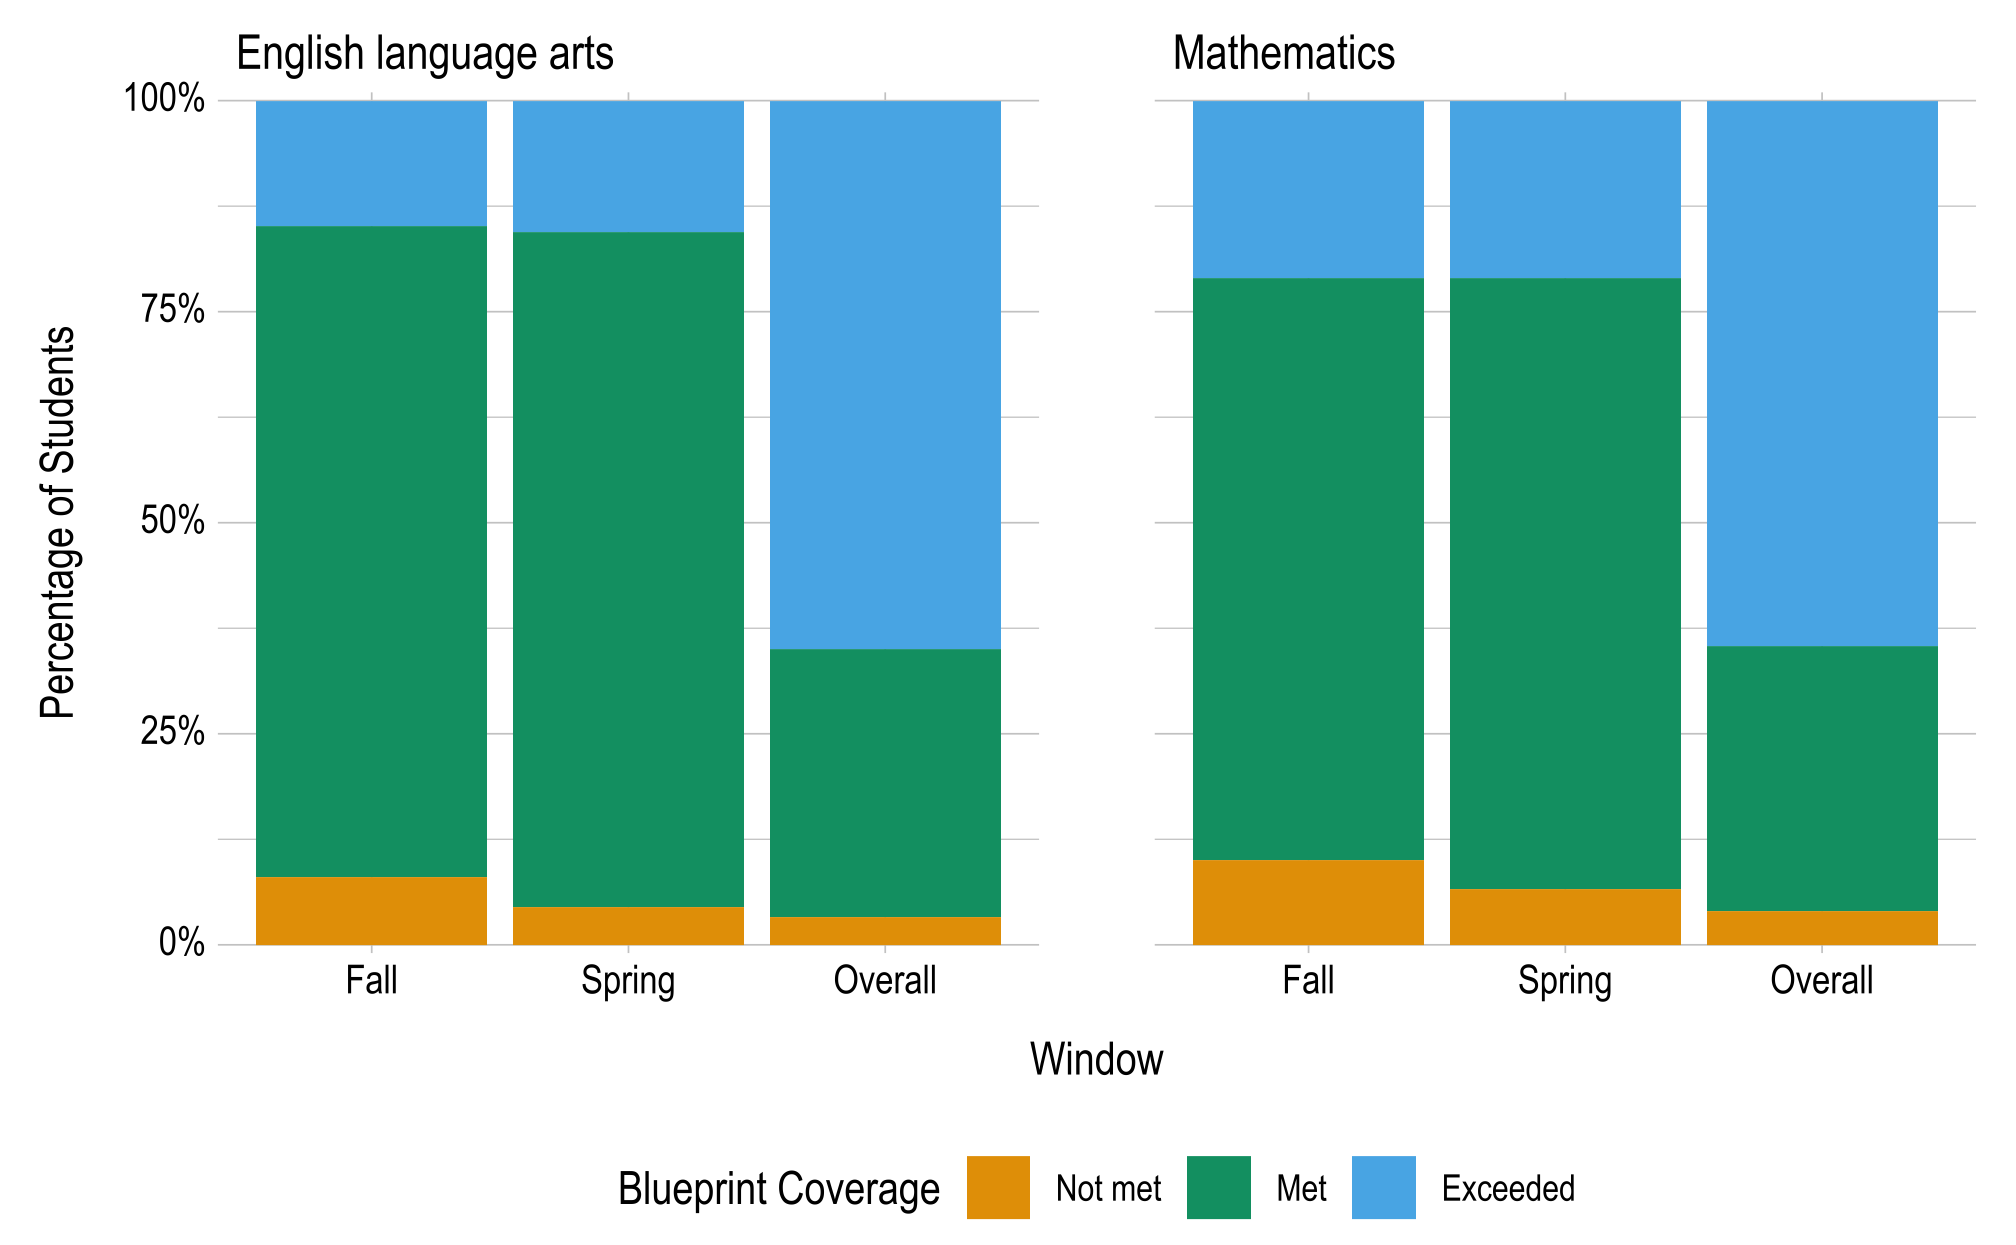 Bar graph showing the percentage of students in each blueprint coverage category by window. The majority of students are in the 'Met' expectations category.